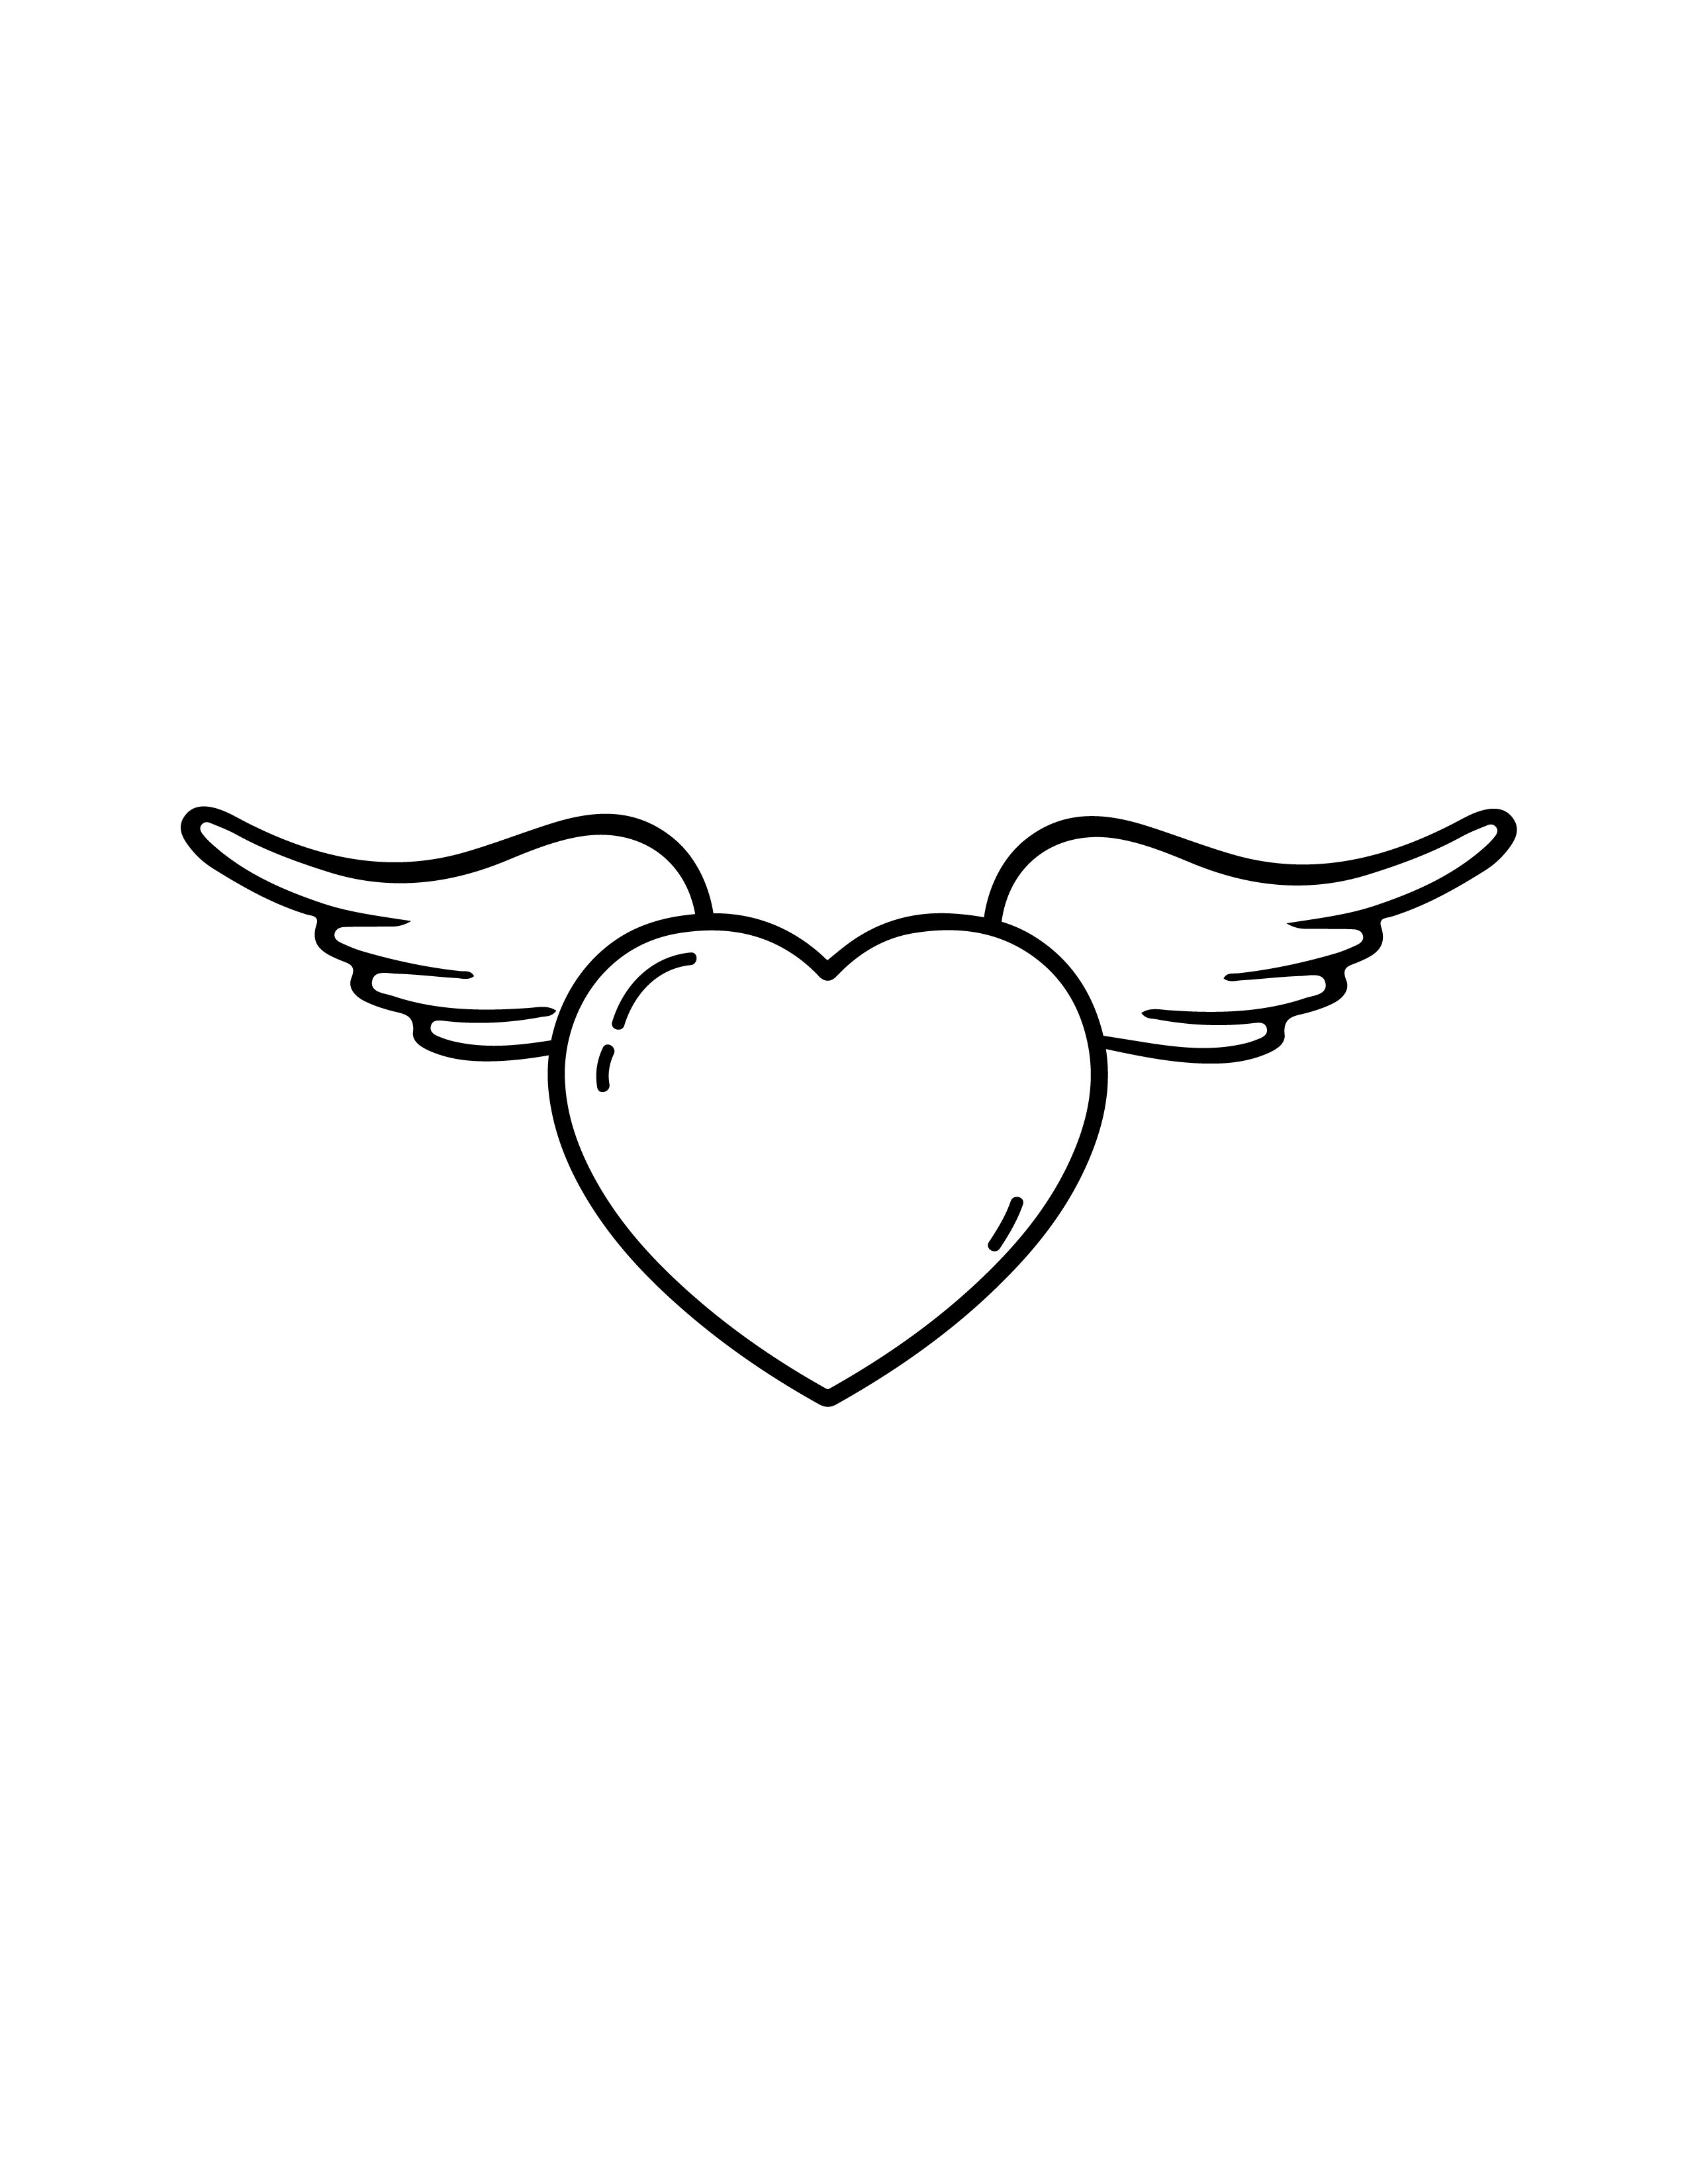 Heart With Wings Line Drawing